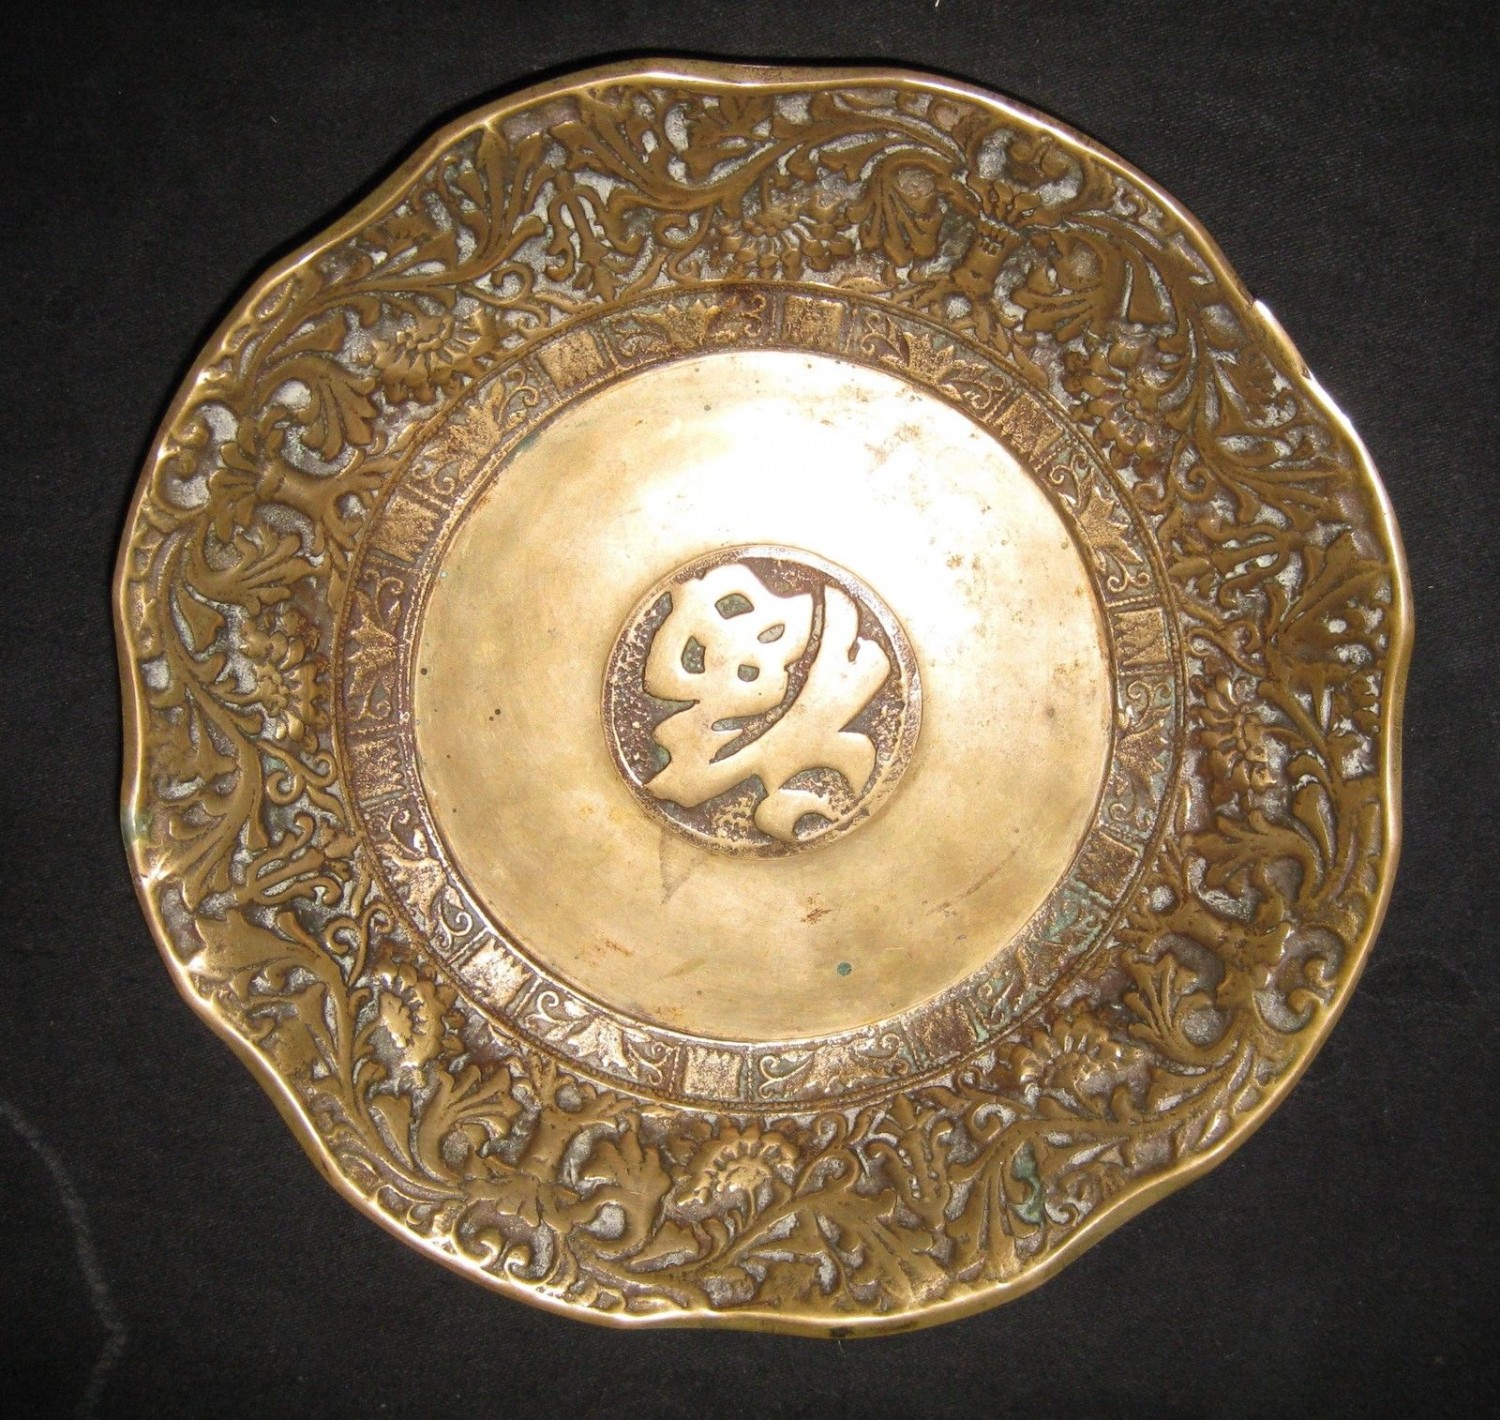 ANTIQUE CHINESE SMALL BRONZE BOWL OR PLATE, NR.